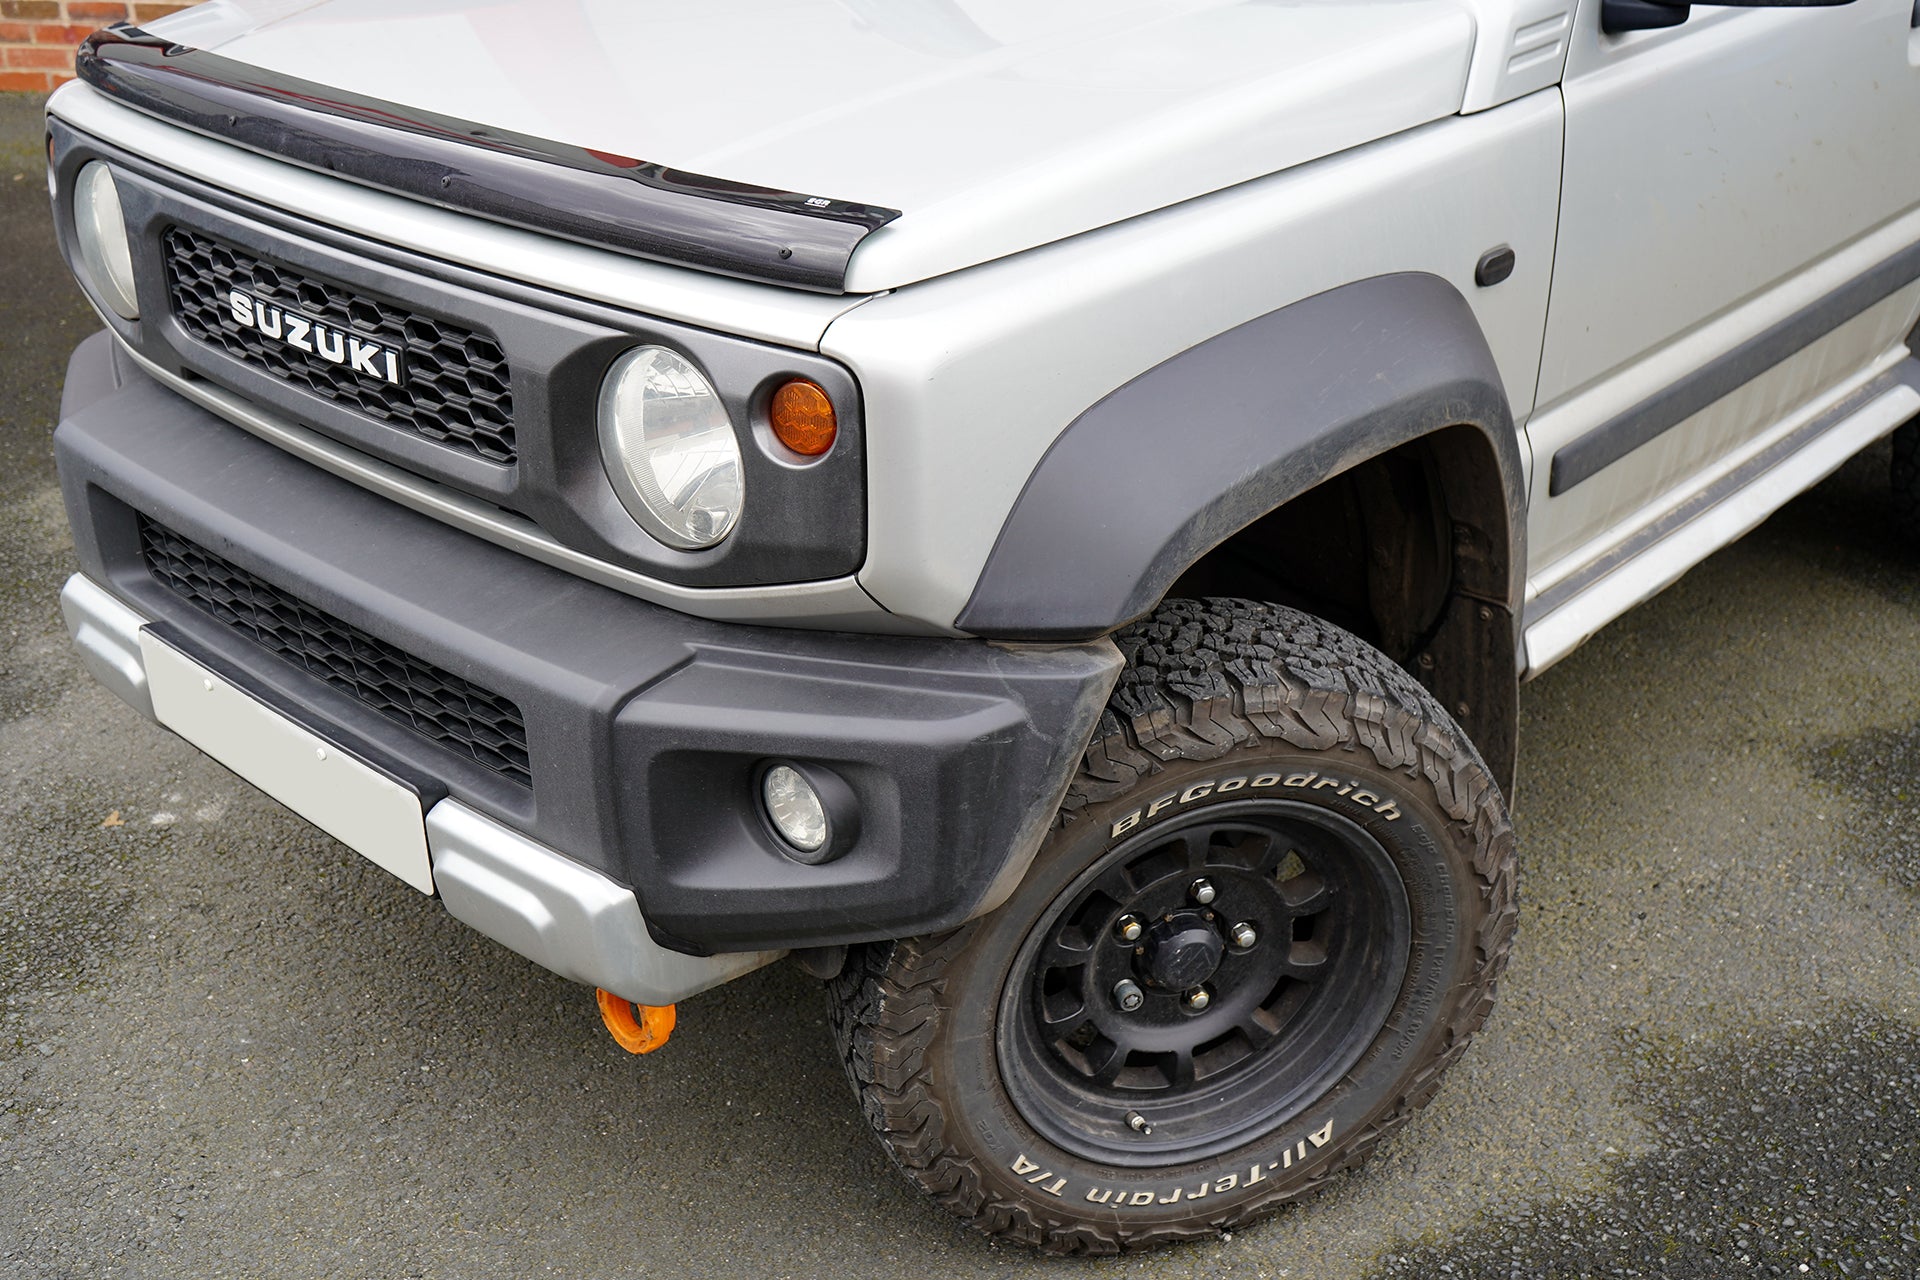 Suzuki Jimny with Bonnet Guard and J-01 High Peak Wheels Lifted Suspension and Front Runner Load Bars from Street Track Life JimnyStyle